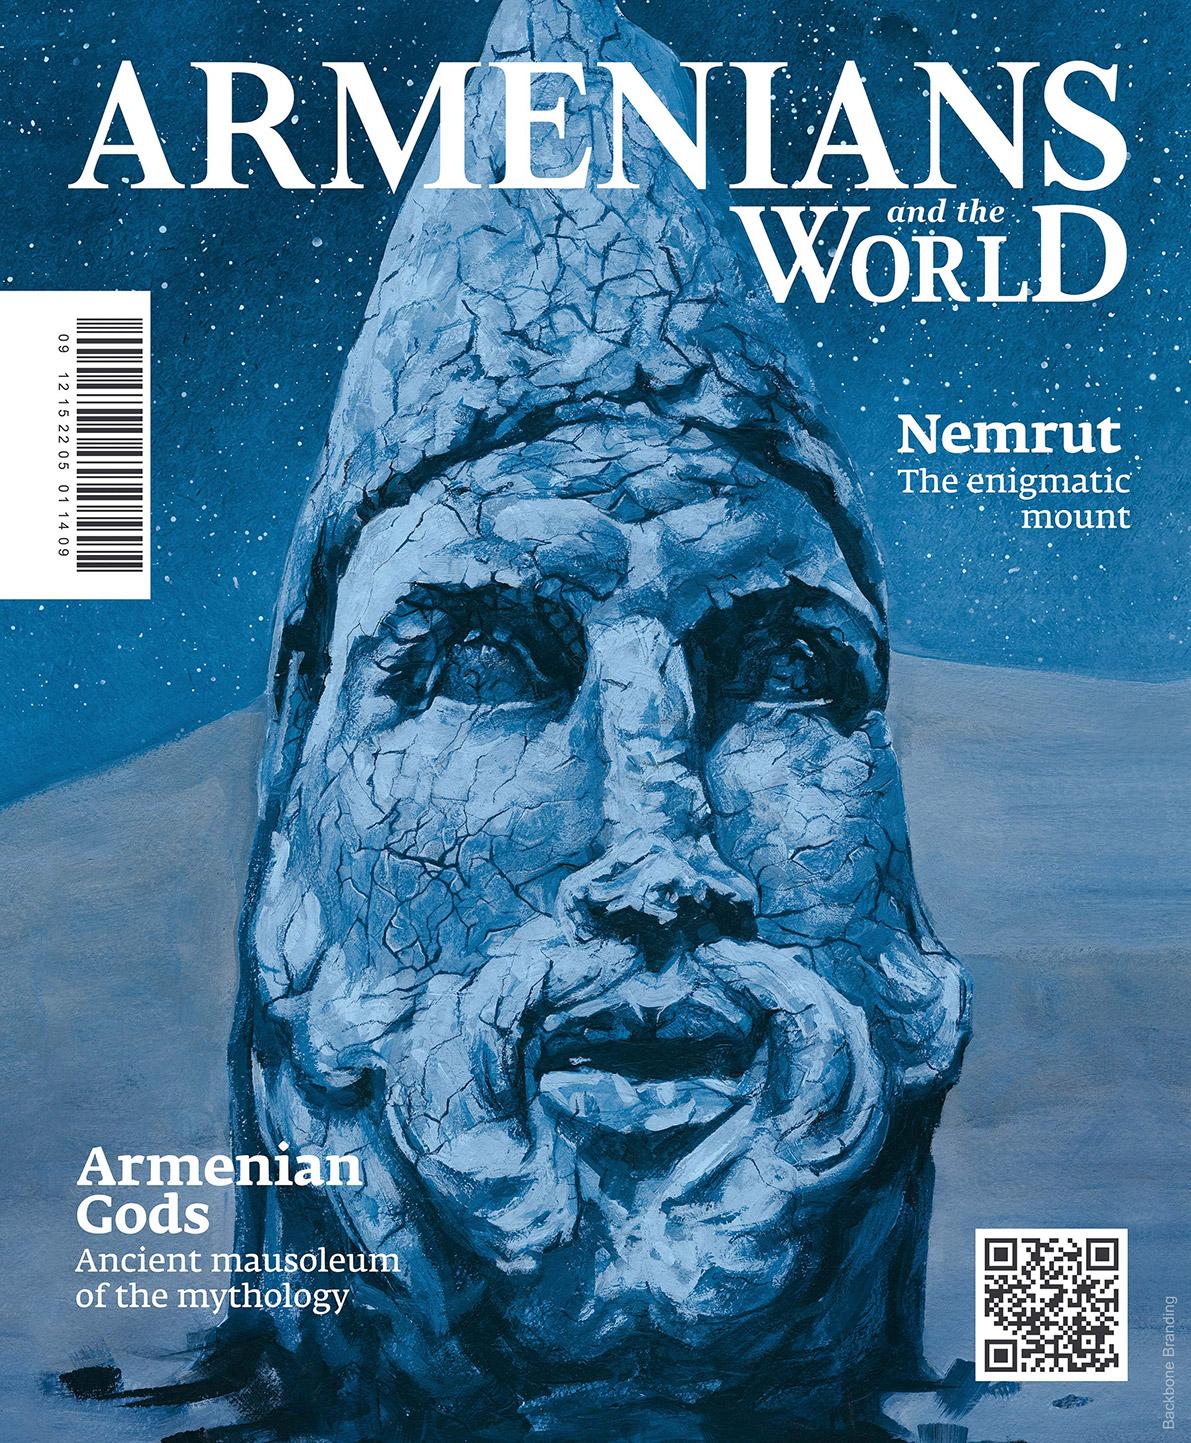 Armenian-and-the-world-13